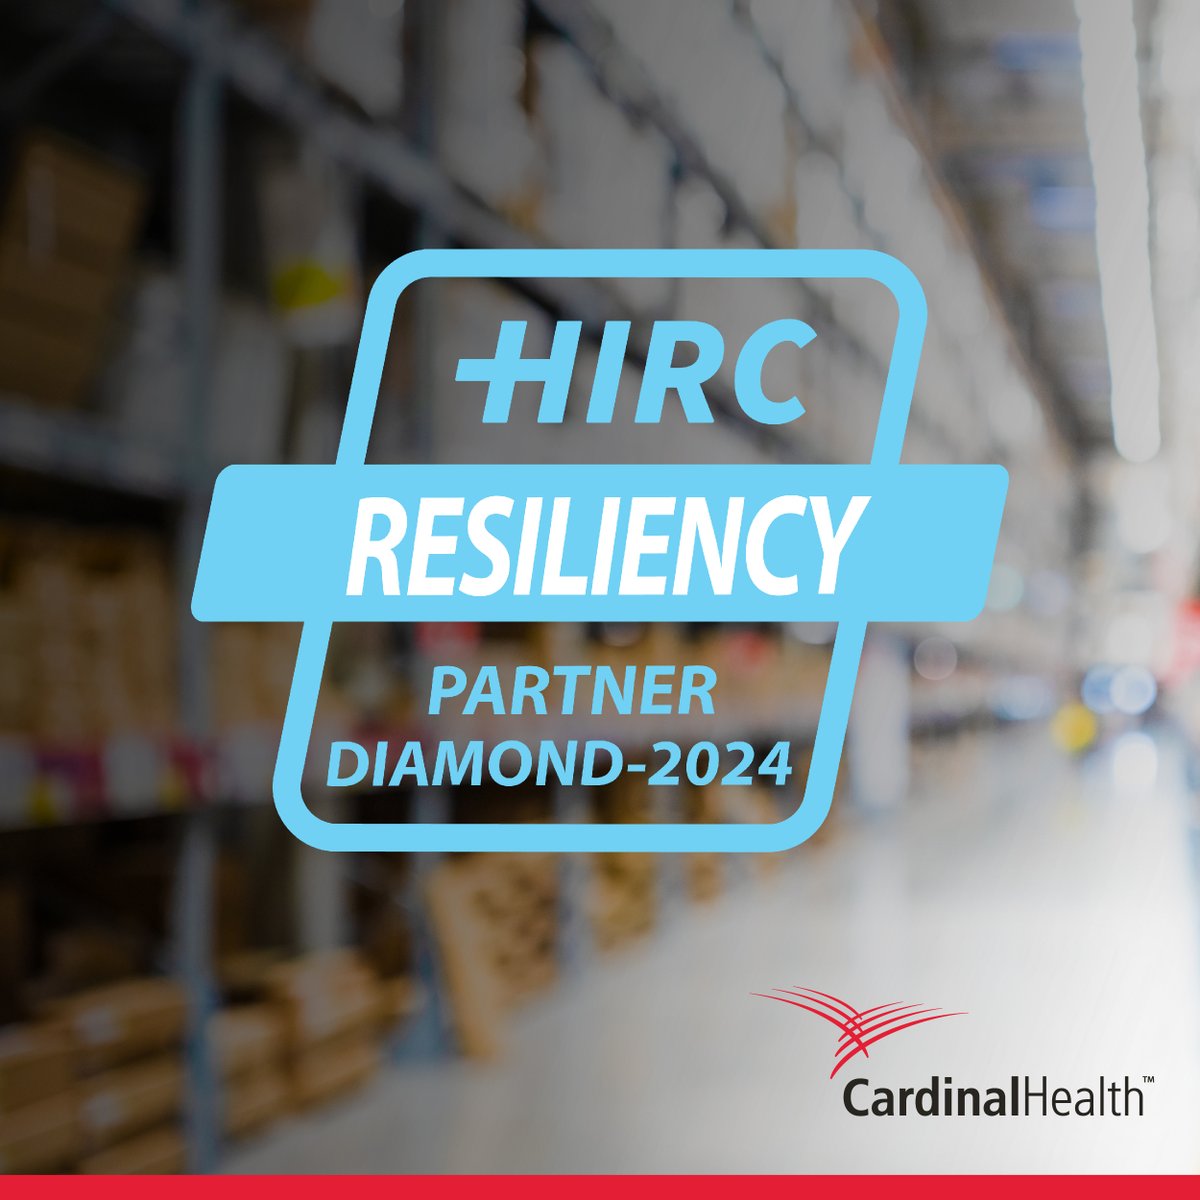 We’re proud to announce our U.S. medical products distribution business has been awarded the highest accolades for supply chain resiliency from non-profit healthcare consortium by HRIC. Read more here: spr.ly/6018Z2maA